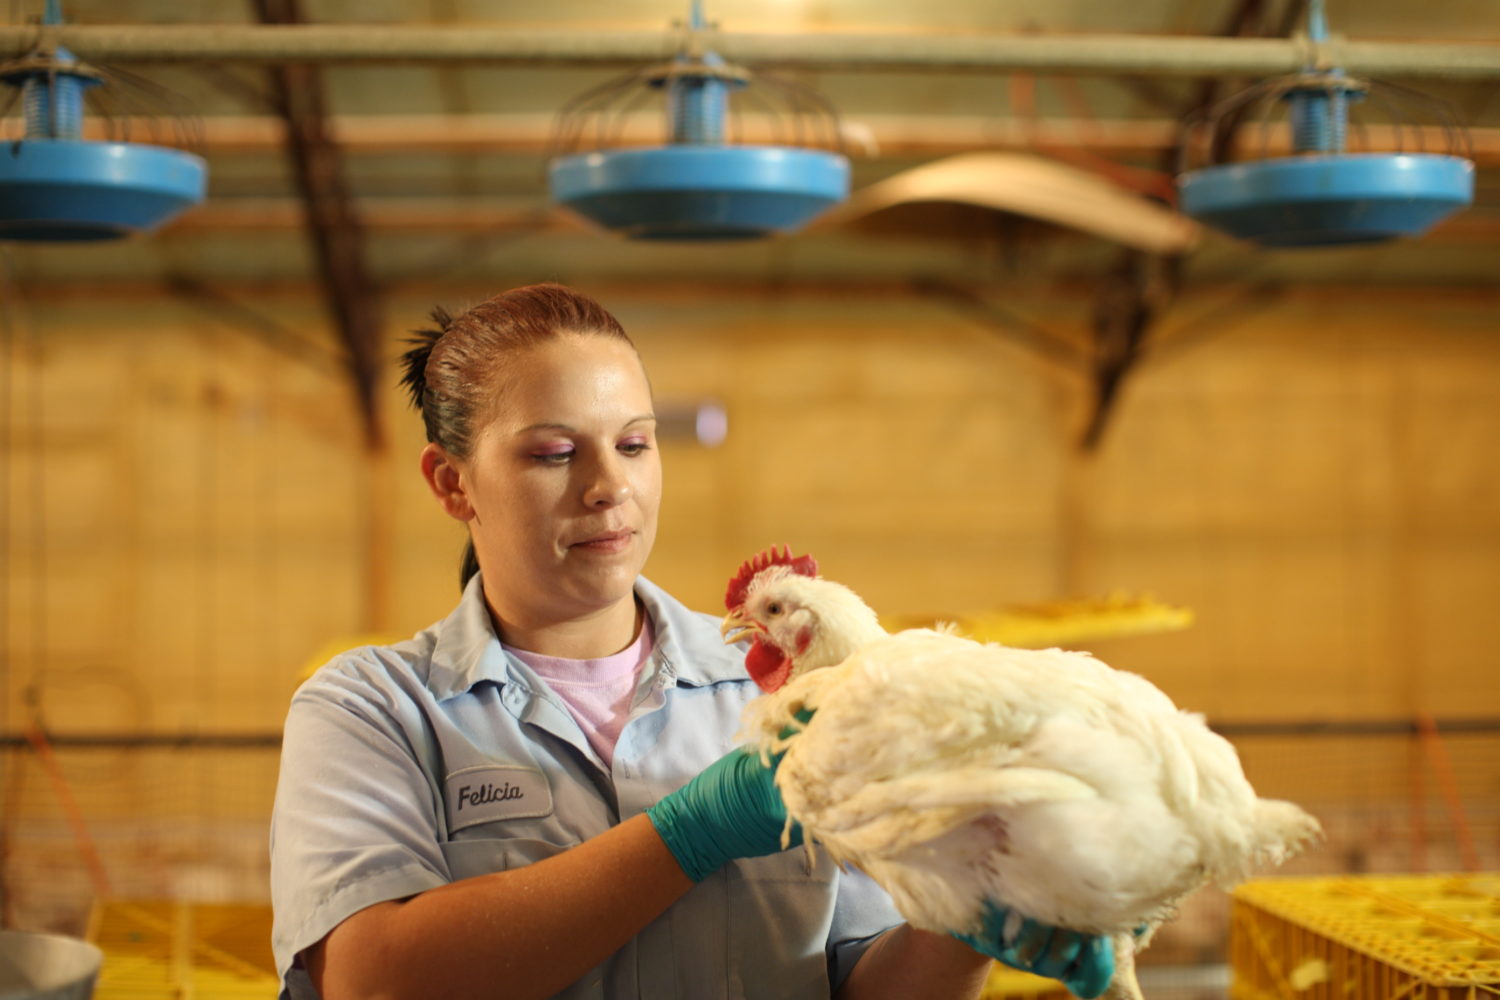 Chickens are examined for feel, weight, observable health.